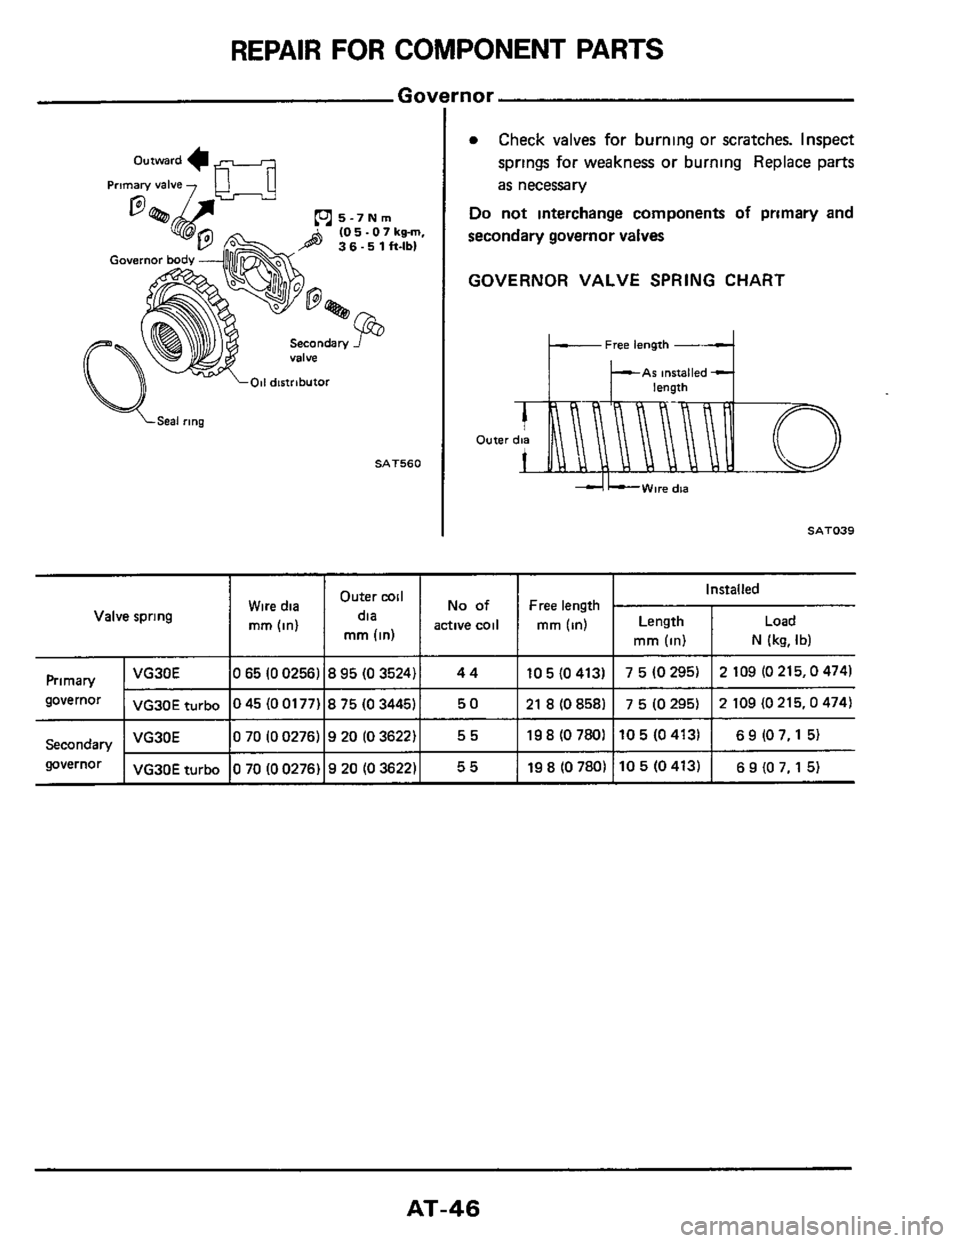 NISSAN 300ZX 1984 Z31 Automatic Transmission Workshop Manual Prmary valve ~~ 
Wire 
dia 
(In) 
(0 5 - 0 7 kg-m, 
Installed Outer mil 
dia 
mm (in) 
No of Free length 
active coil mm (in) Length 
mm (in) N (kg, Ib) 
- \01i distributor 
VG30E Primary 
governor  V